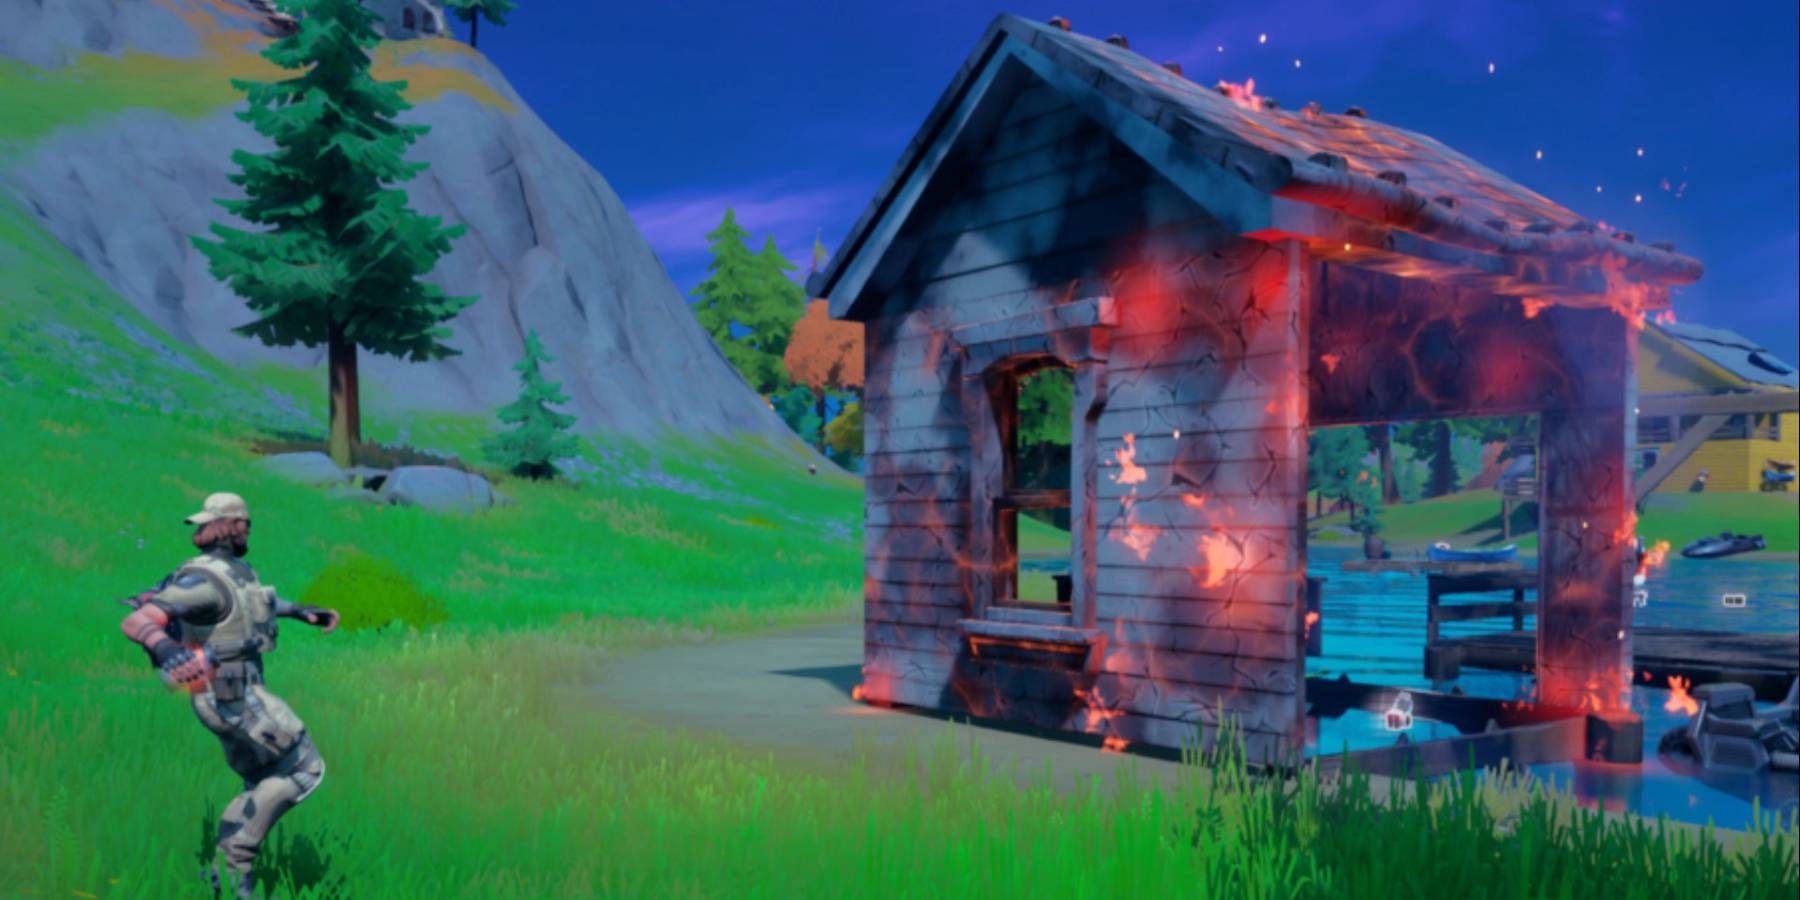 How to ignite 100 structures in fortnite